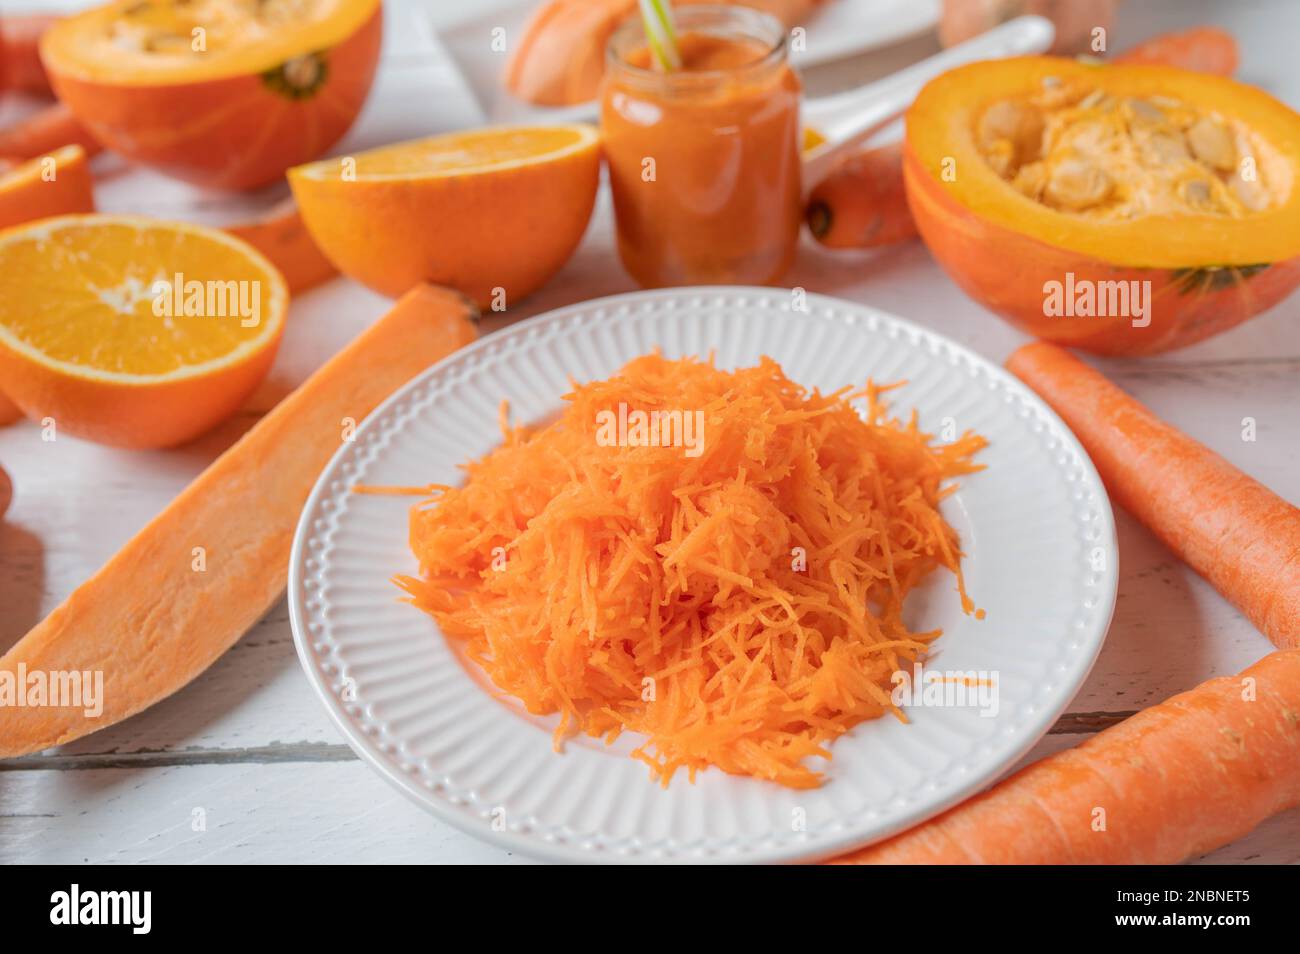 Orange colored vegetables and fruit on white background. Closeup and front view Stock Photo